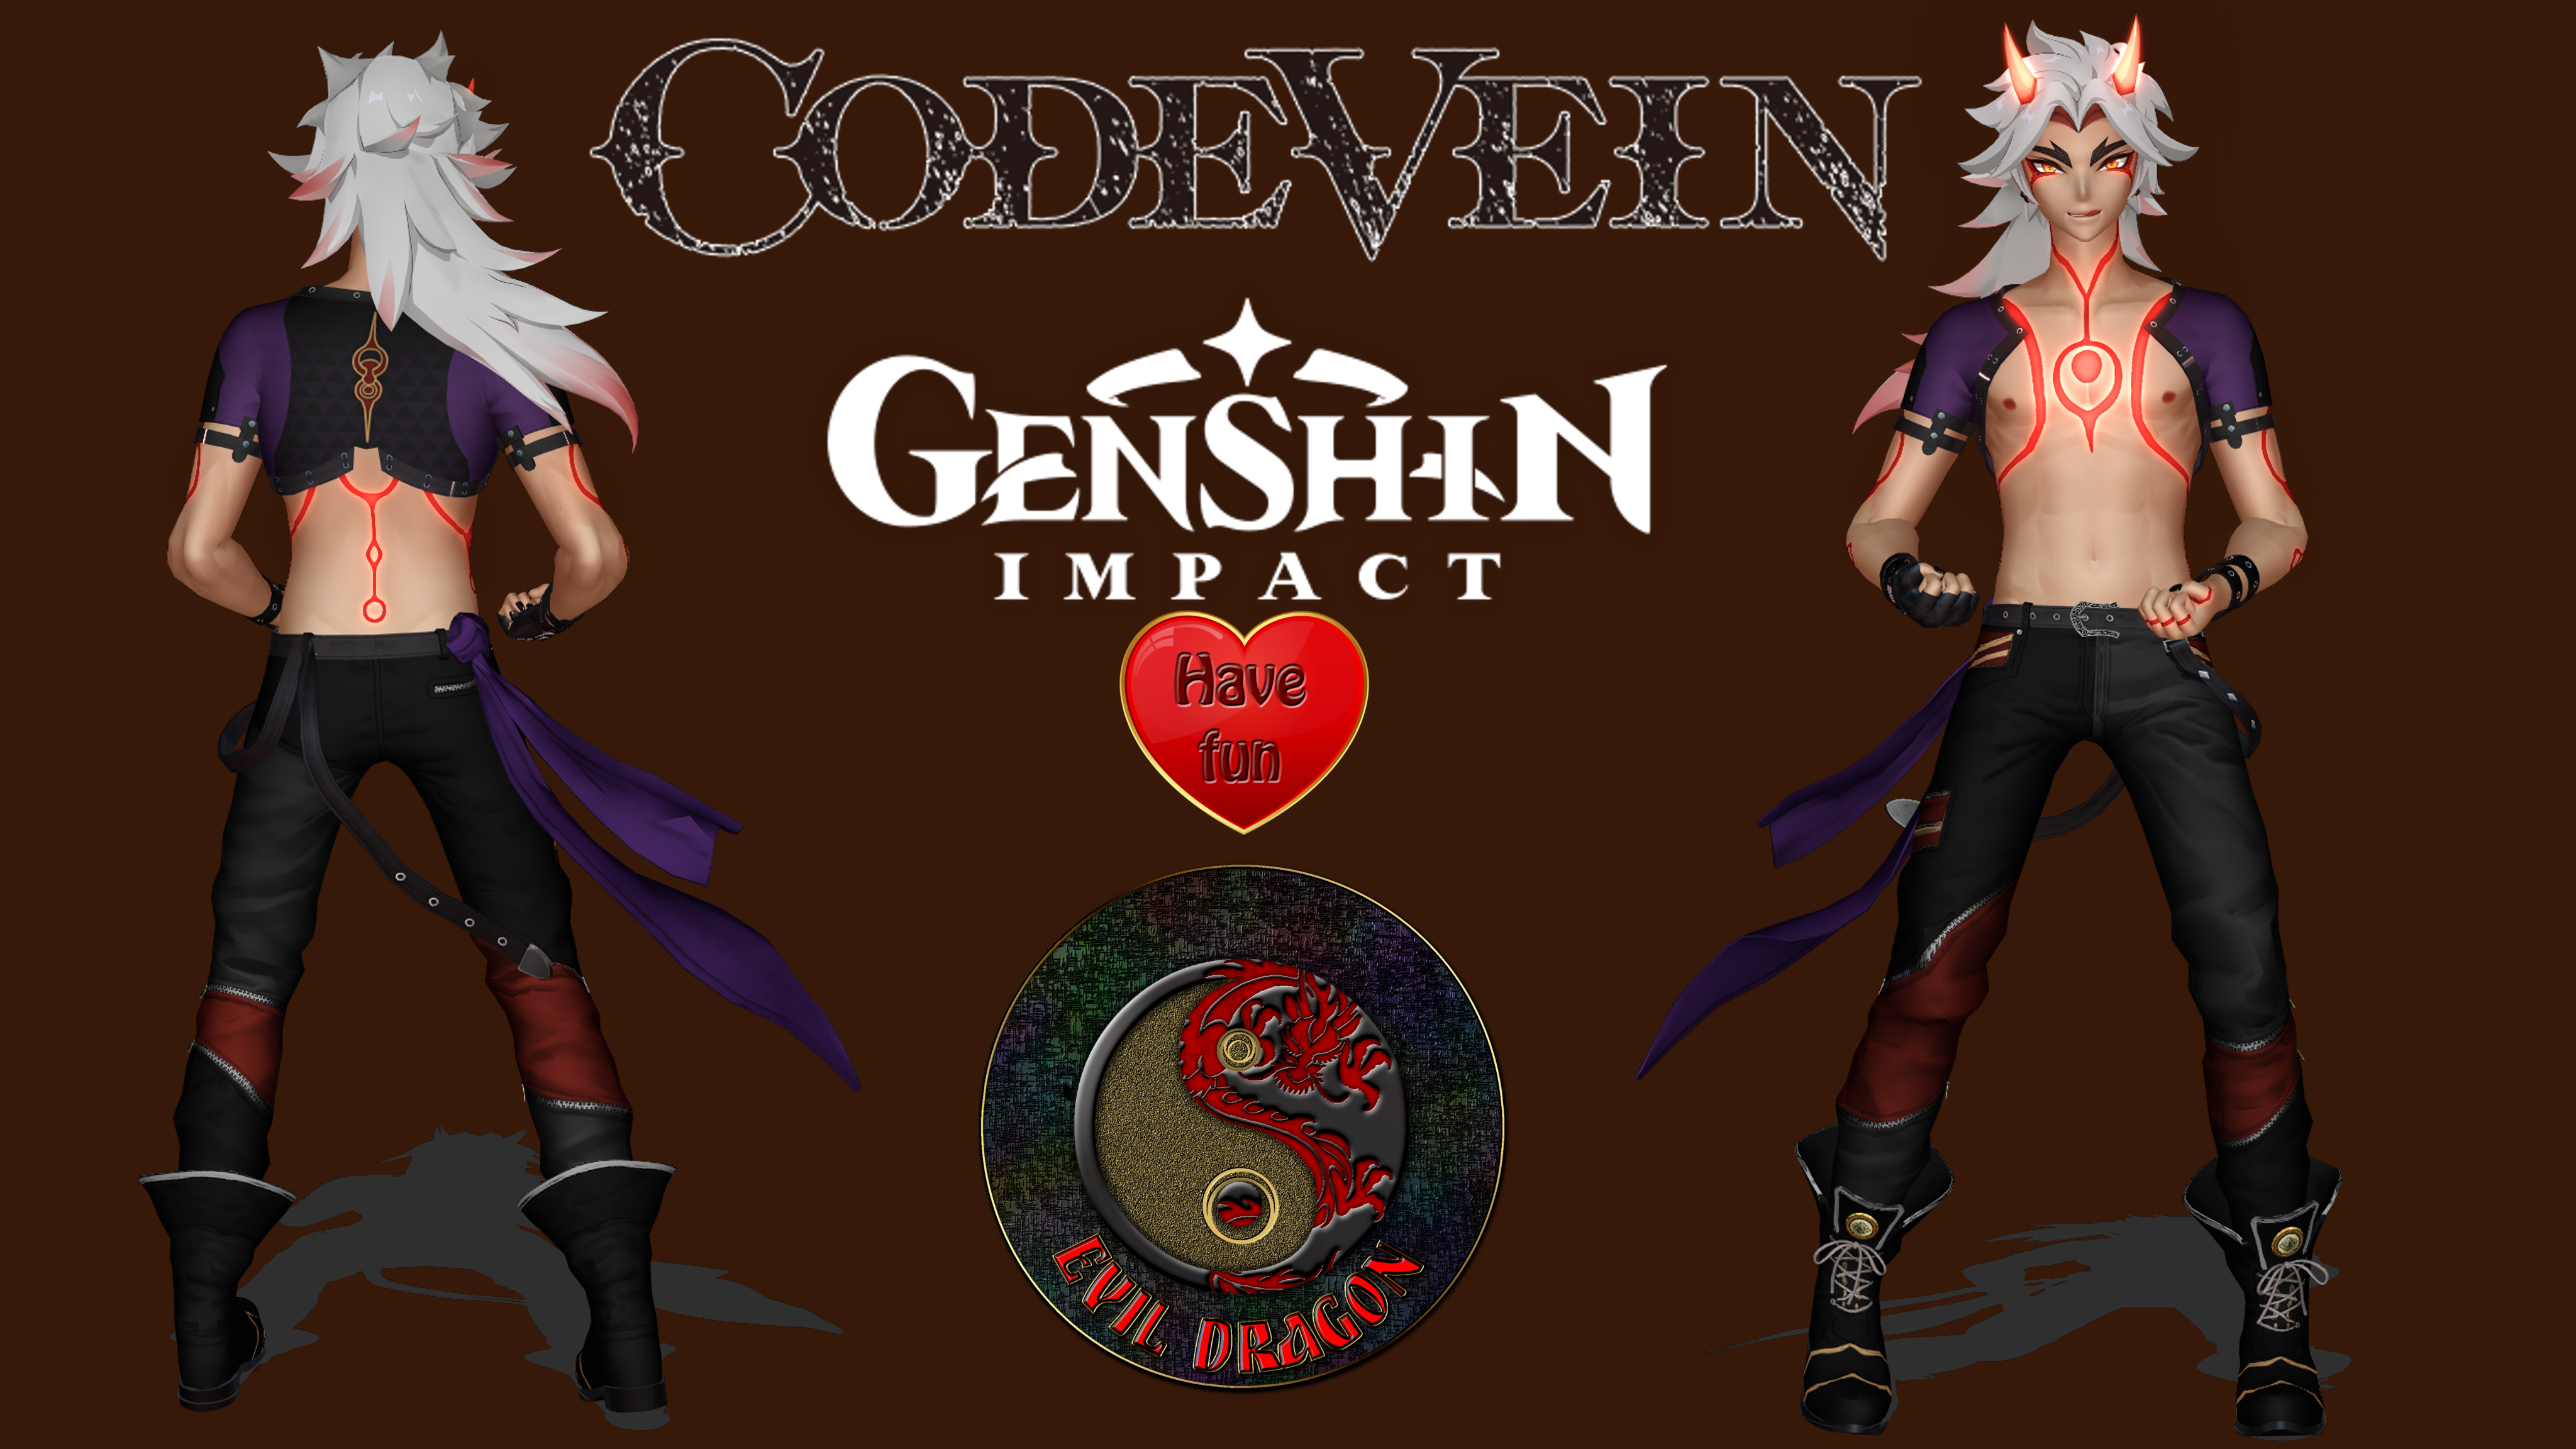 Code Vein - Bare upper body casual wear for Male by ogami4 on DeviantArt